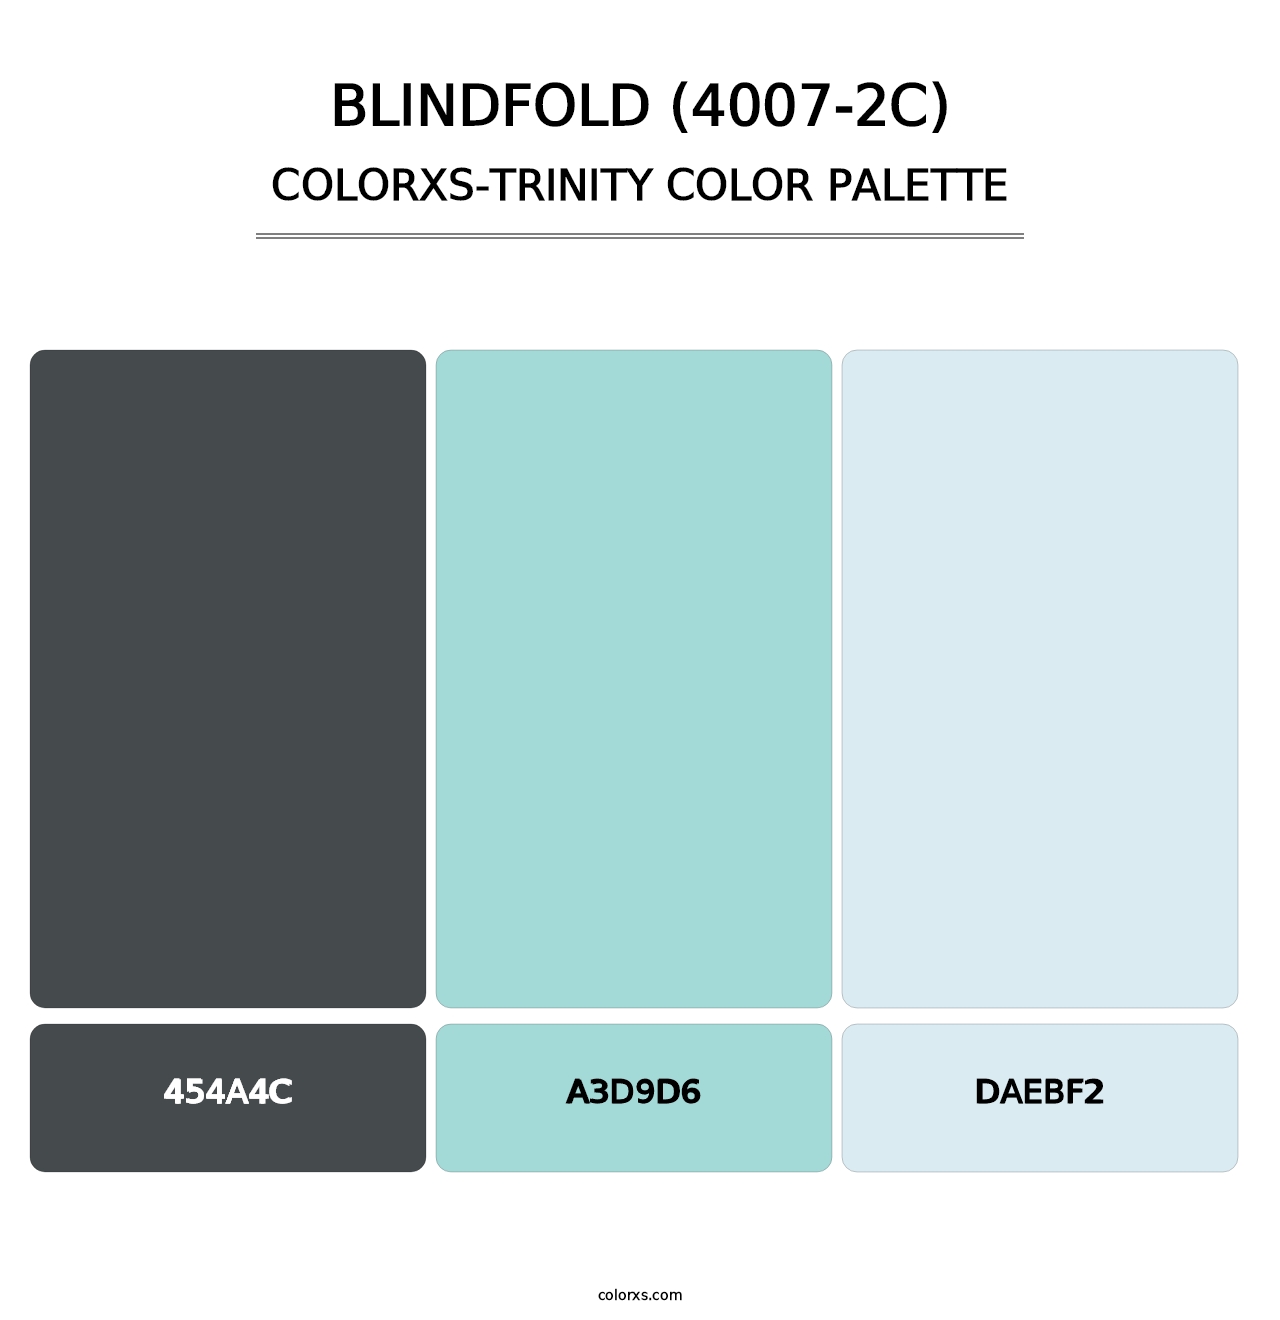 Blindfold (4007-2C) - Colorxs Trinity Palette